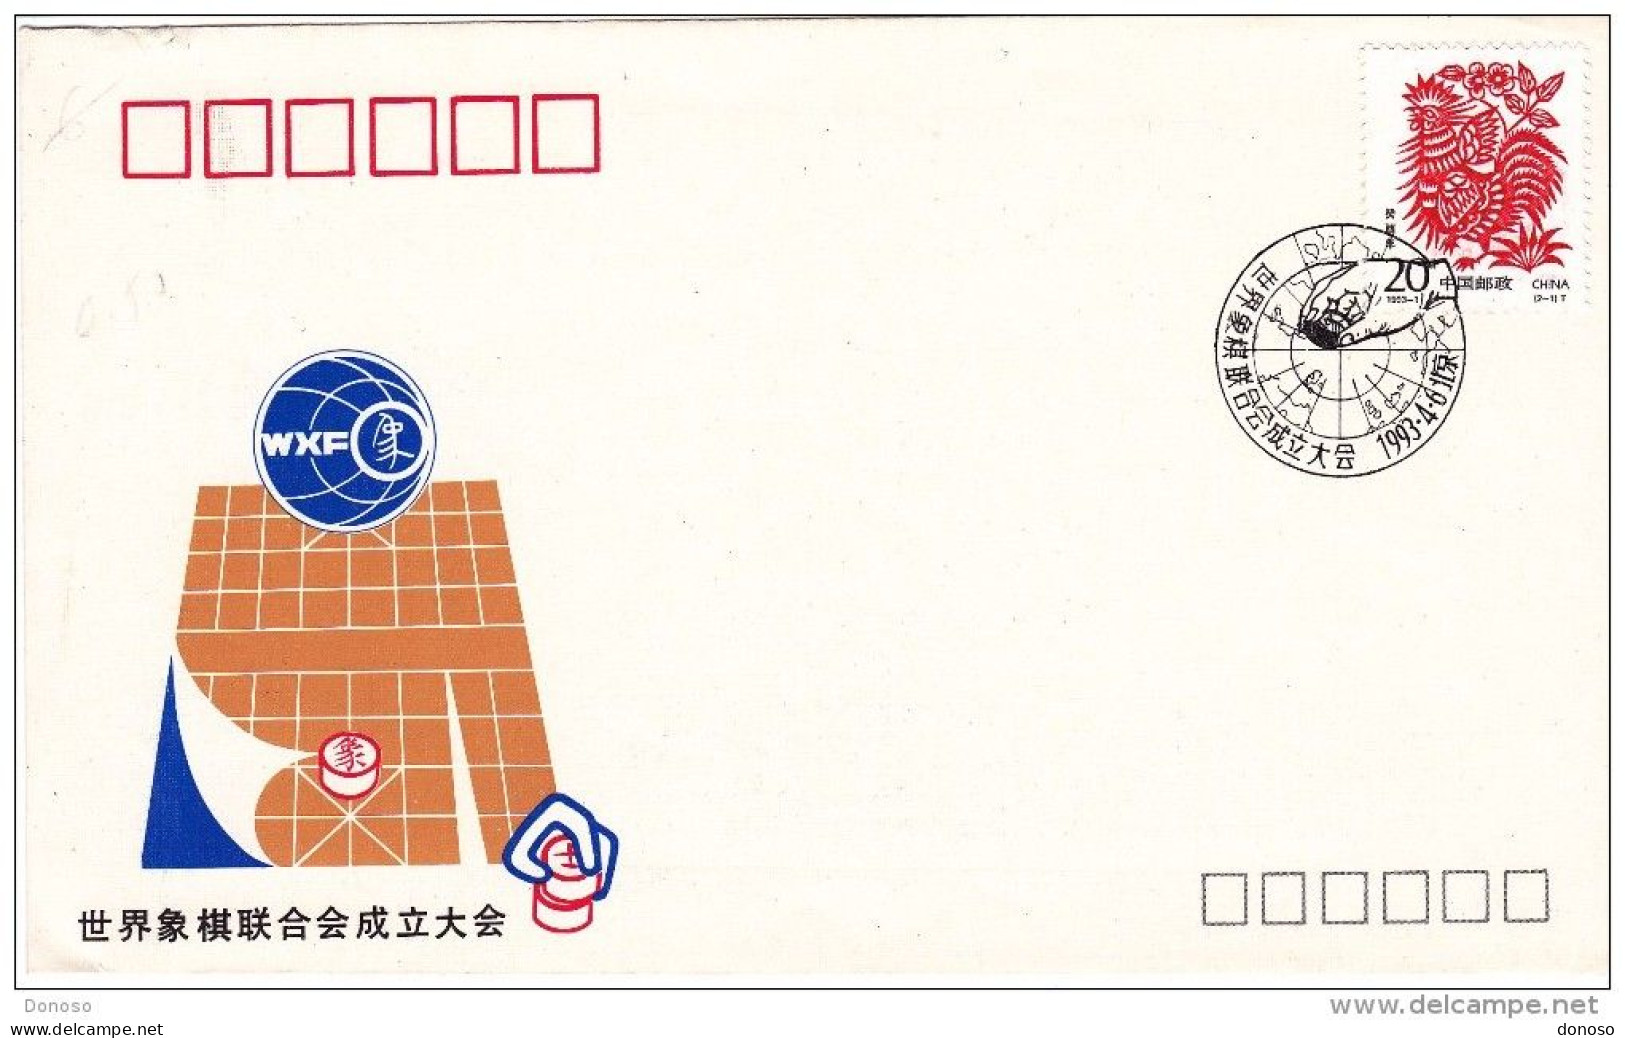 CHINE 1993 FDC NOUVEL AN Yvert 3152 - 1990-1999